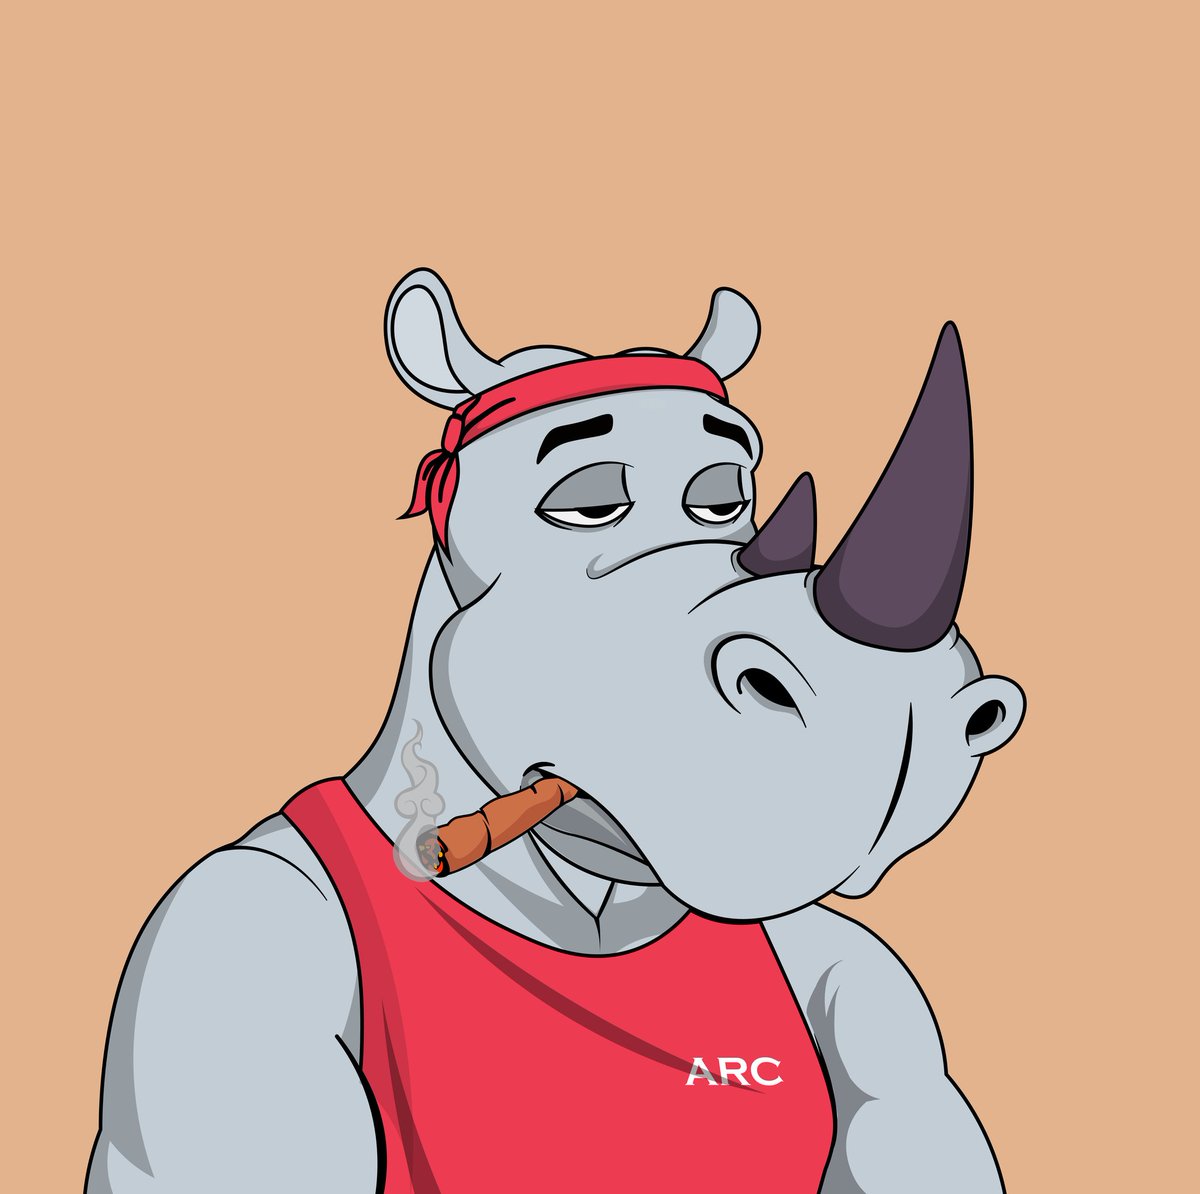 Representing ARC: the Athletic Rhino Club! 10k athletic rhino 🦏 #NFTs 

#NFT #NFTdrops #NFTCommunity #nftart #NFTCollection #NFTProject #Crypto #cryptocurrency #CryptoNews #Etherium #Solana #SolanaNFTs #SolanaNFT #SolanaCommunity #OpenSeaNFT #OpenSeaCollection #OpenSeaMarket